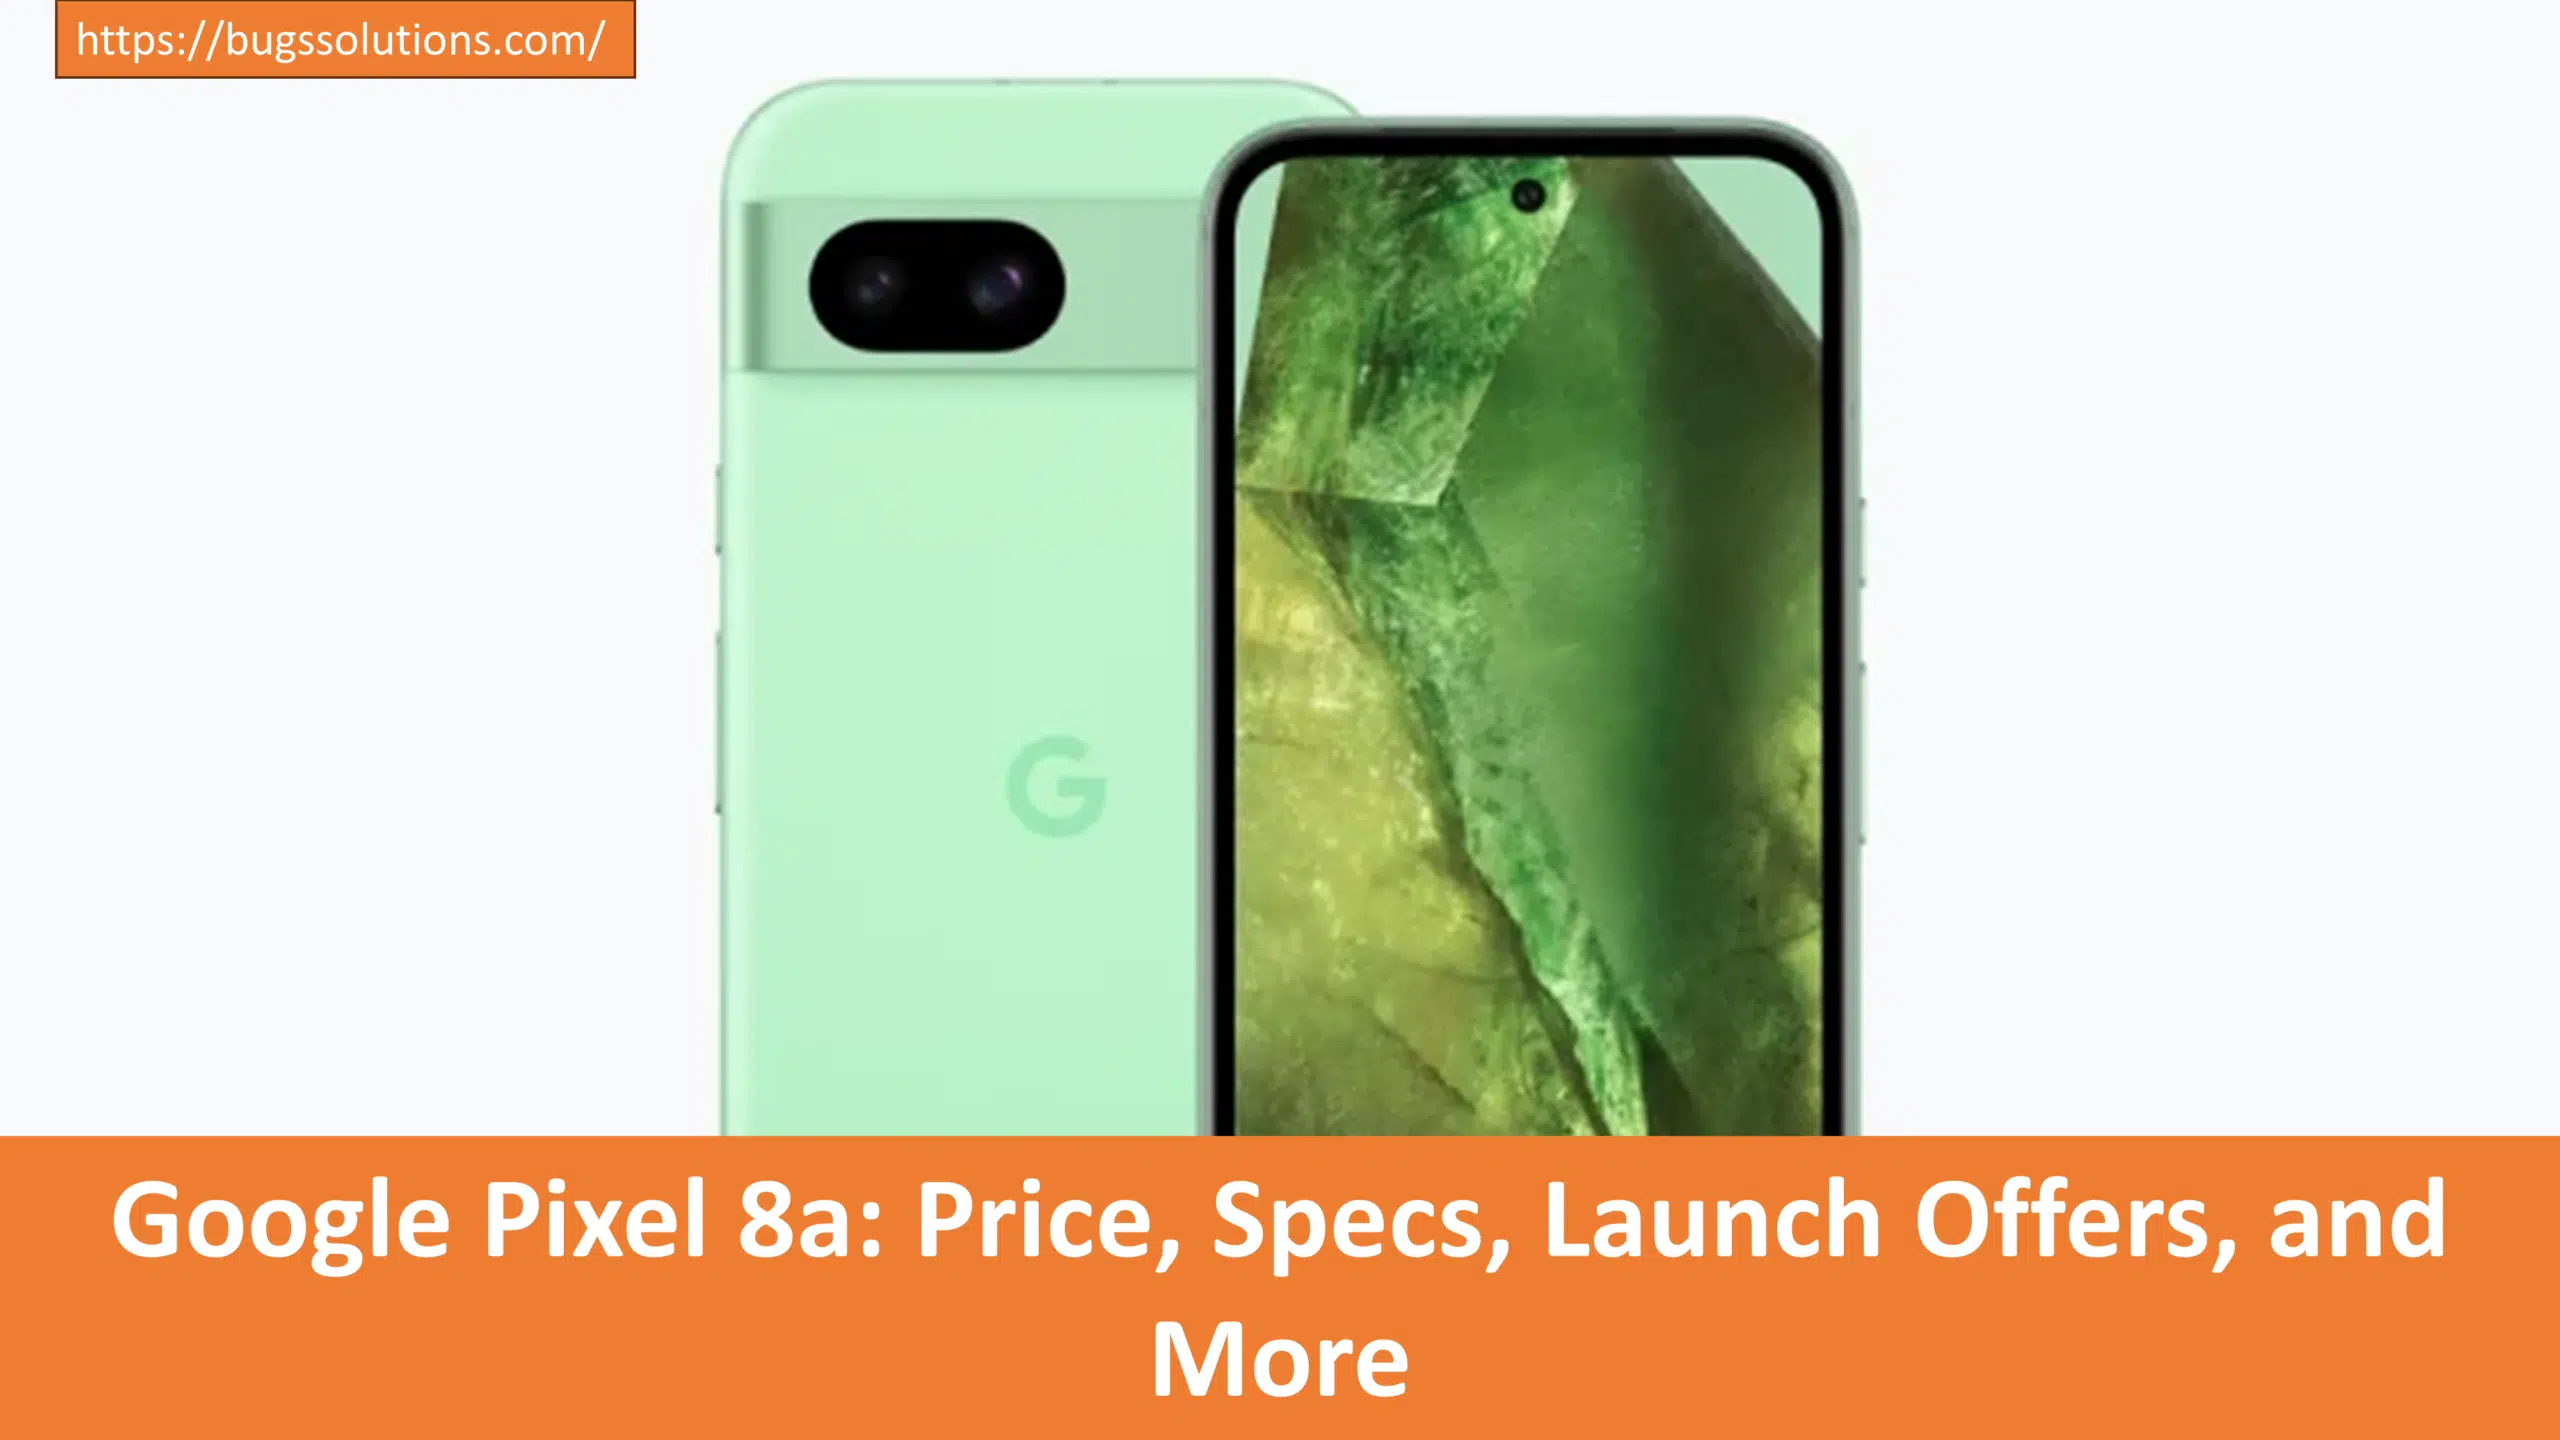 Google Pixel 8a: Price, Specs, Launch Offers, and More